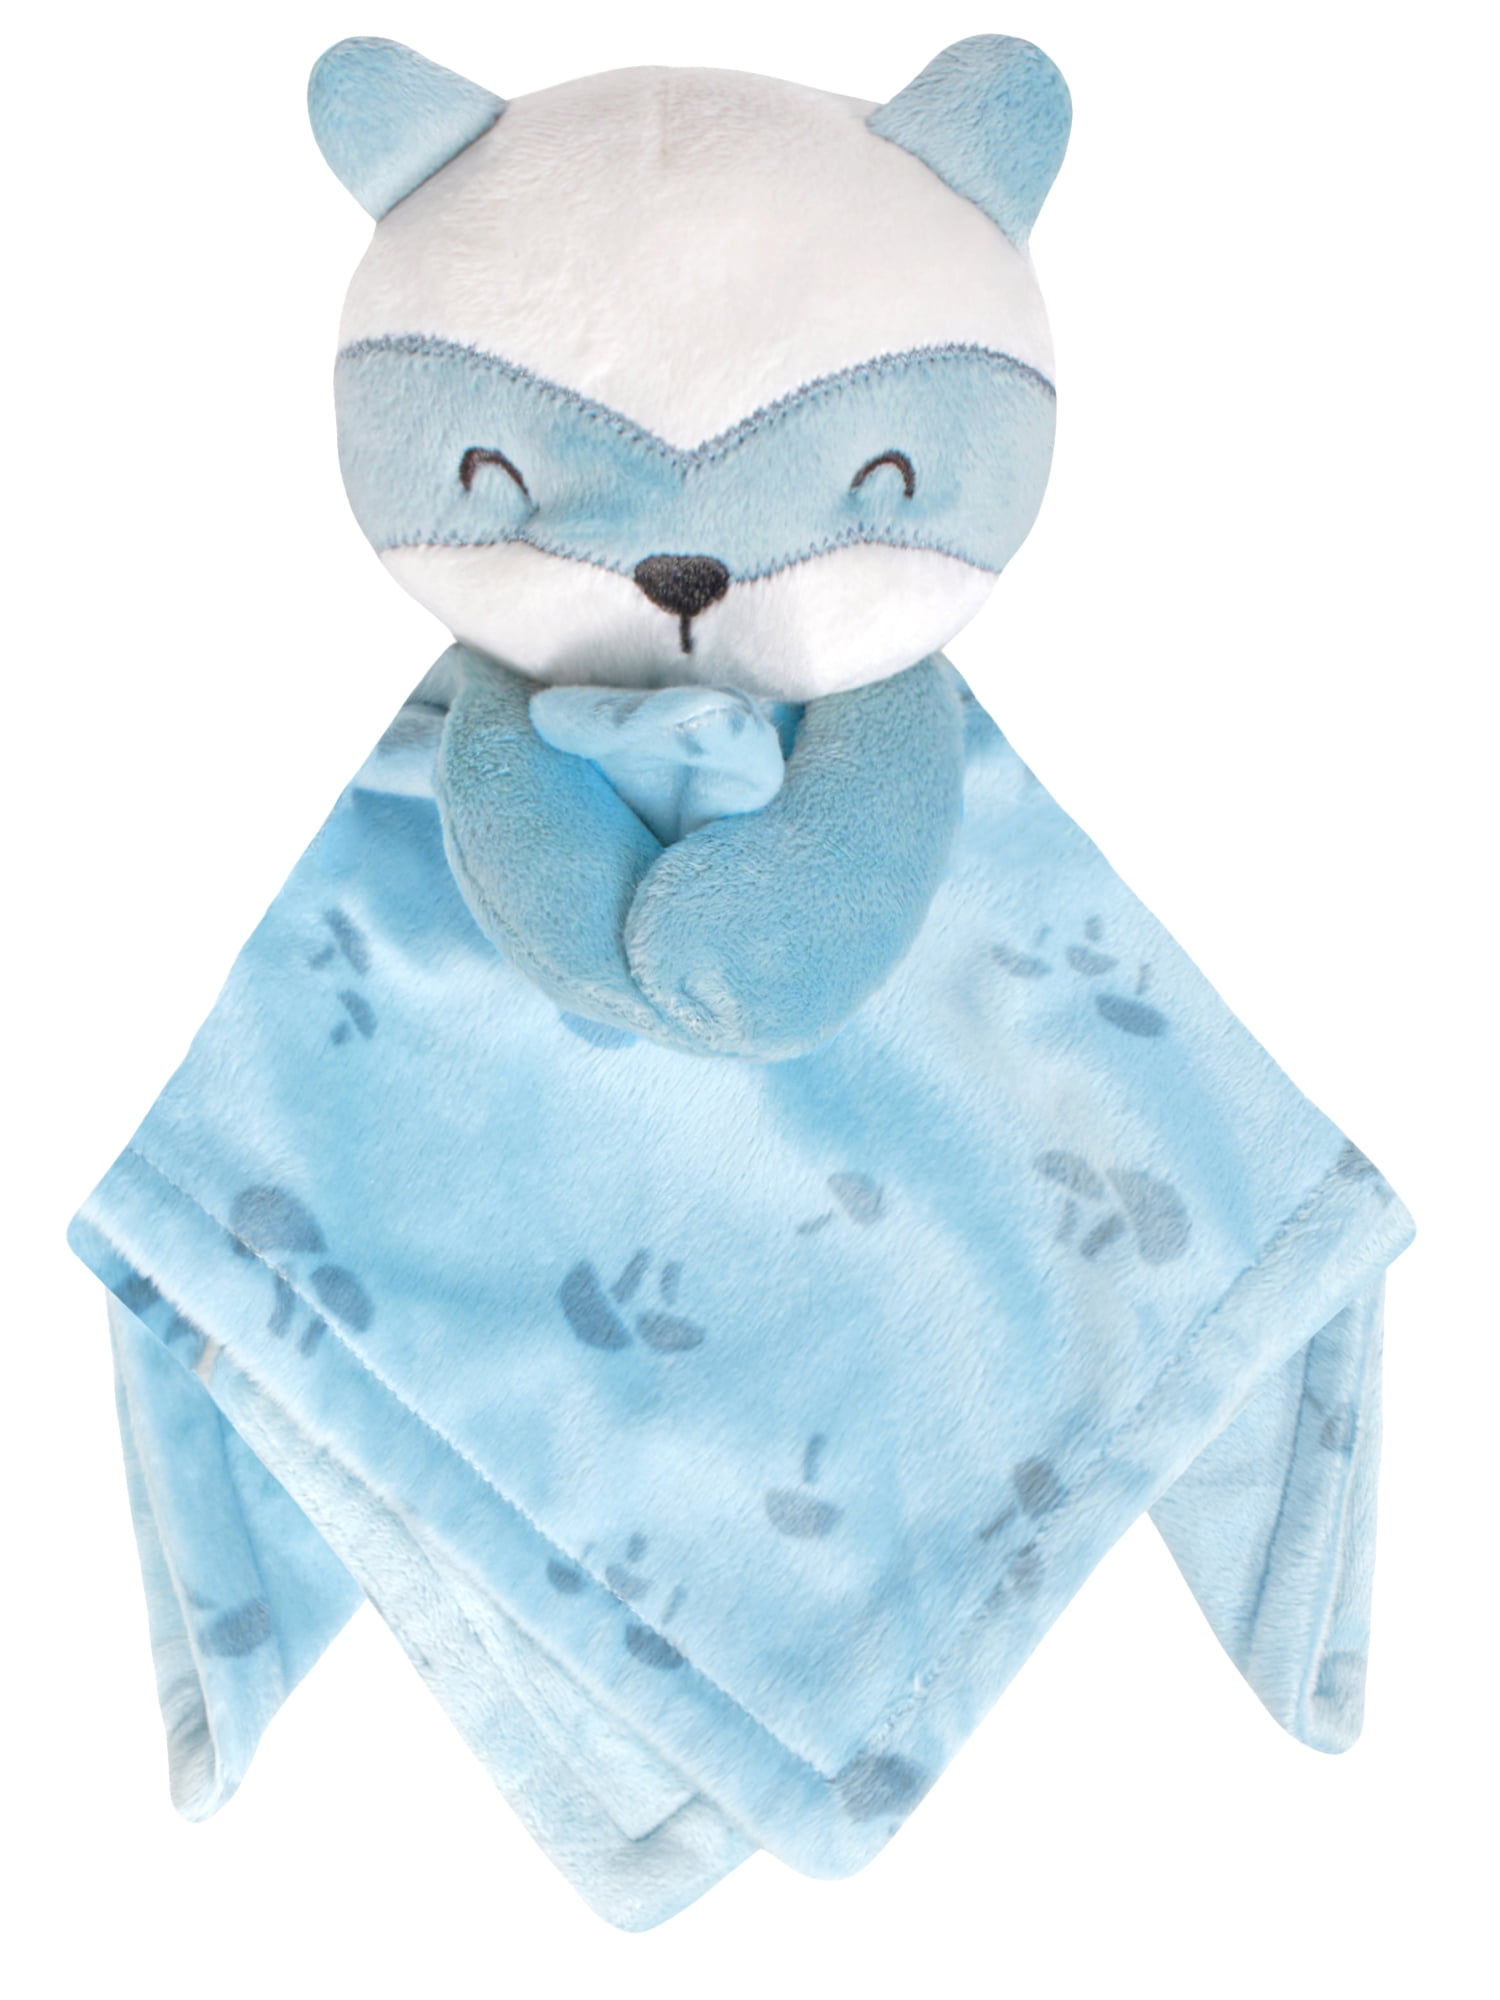 Modern Moments by Gerber Baby & Toddler Girl or Boy Plush Security Blanket, Blue Fox